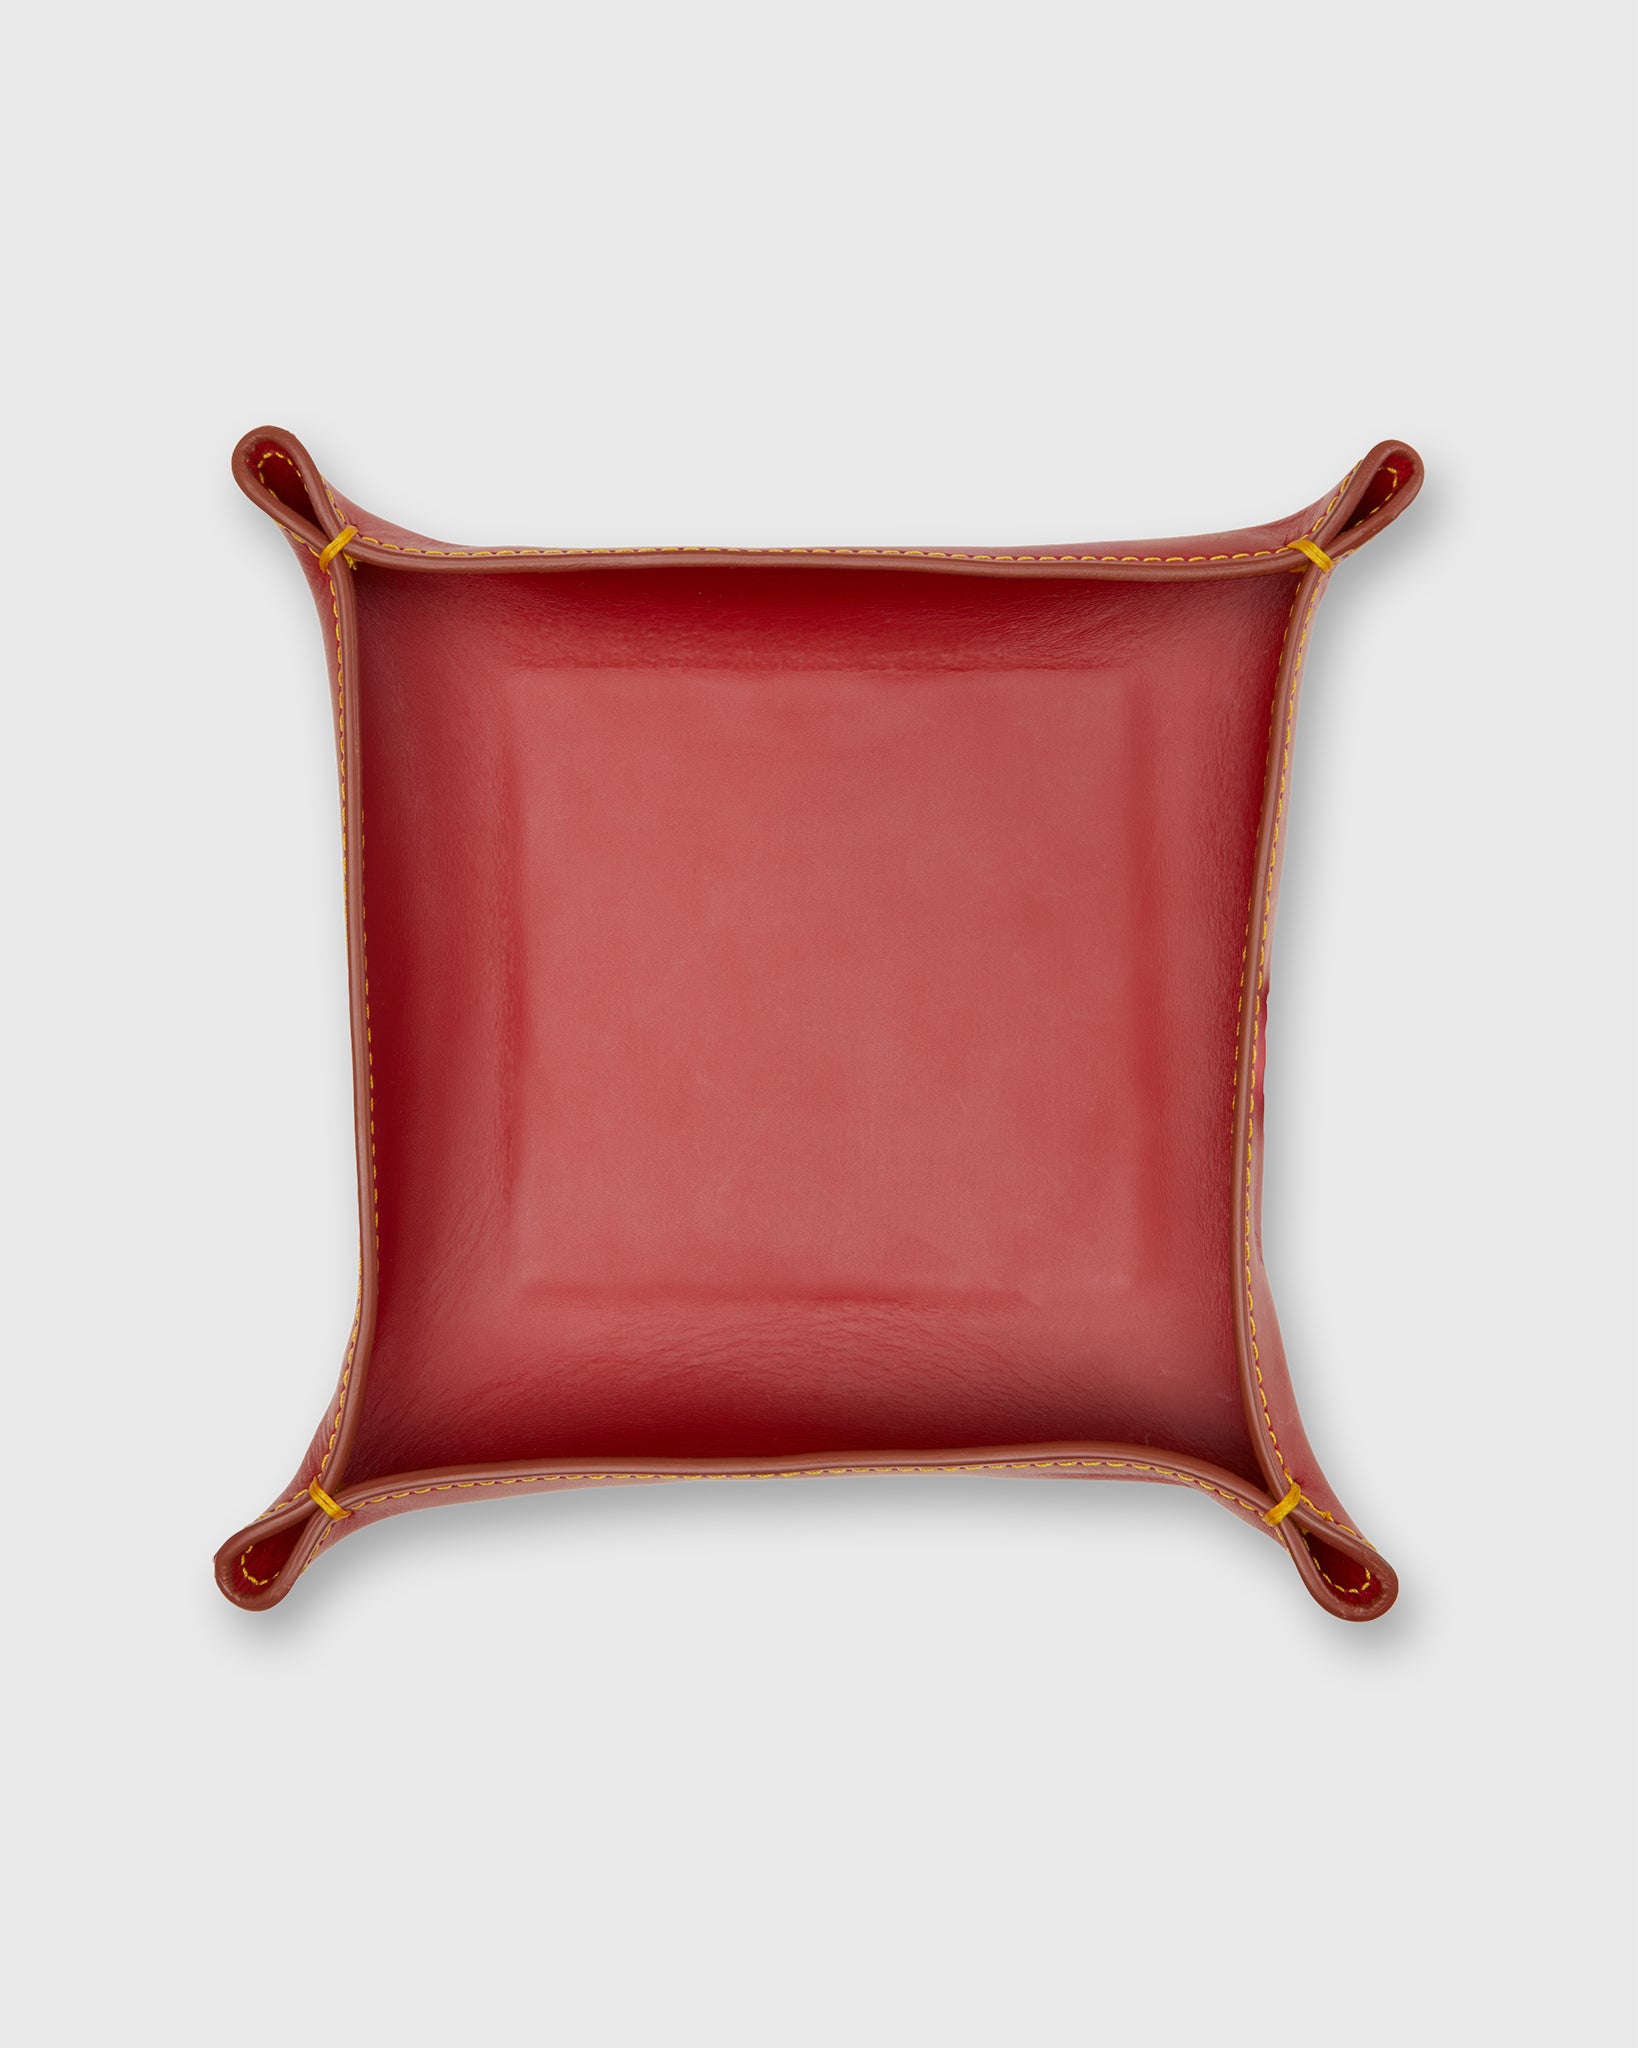 Medium Tray in Red Leather